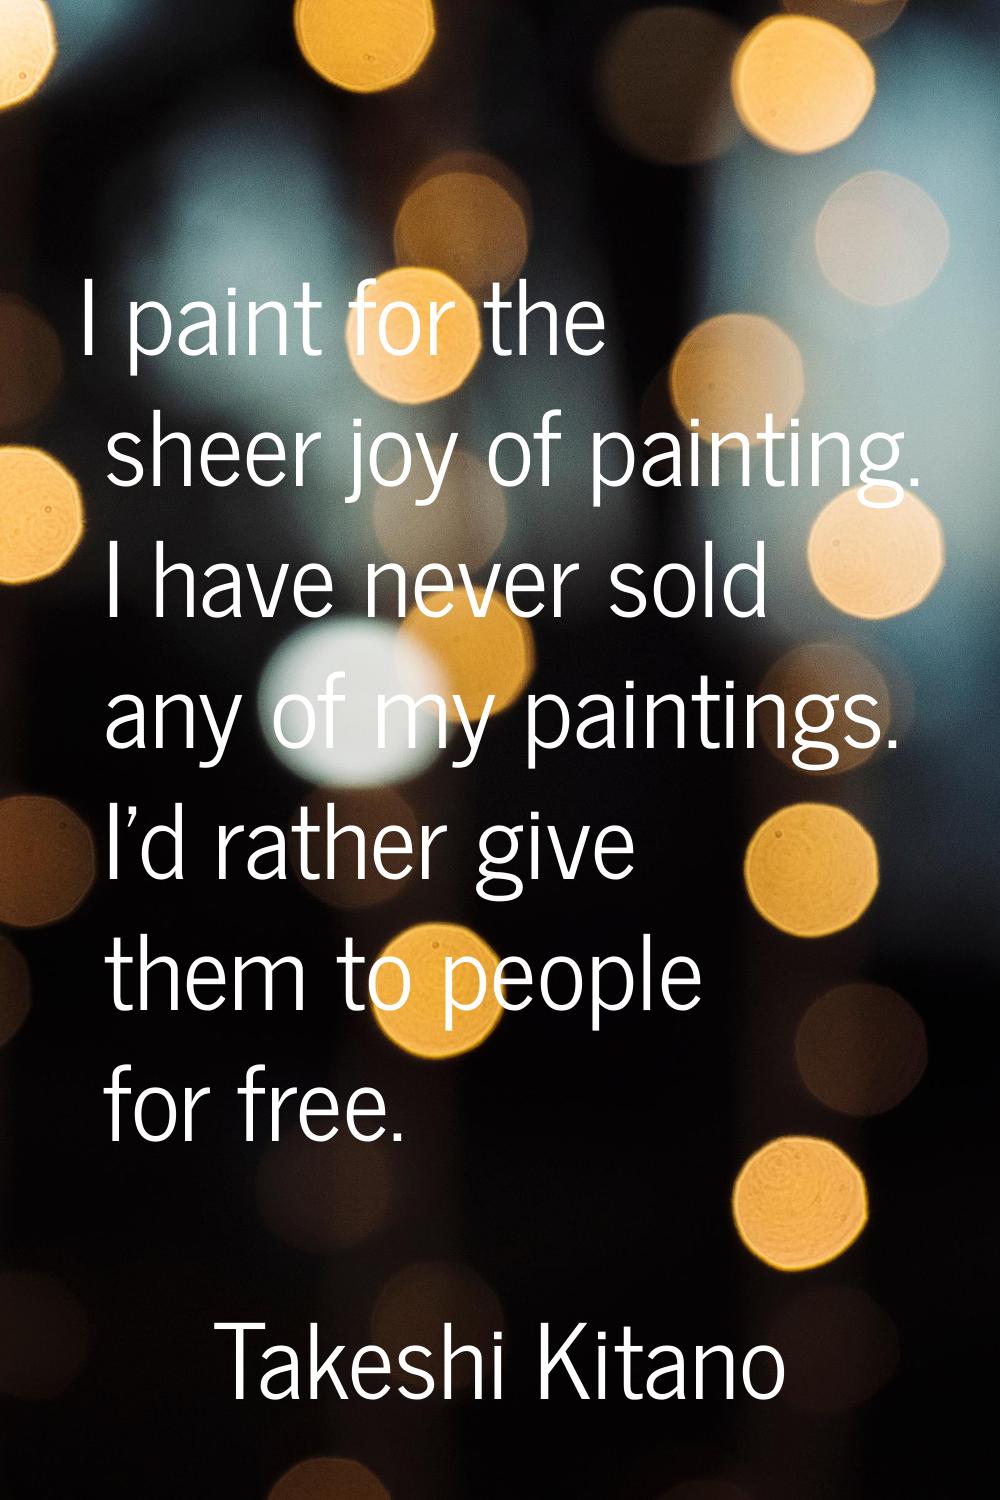 I paint for the sheer joy of painting. I have never sold any of my paintings. I'd rather give them 